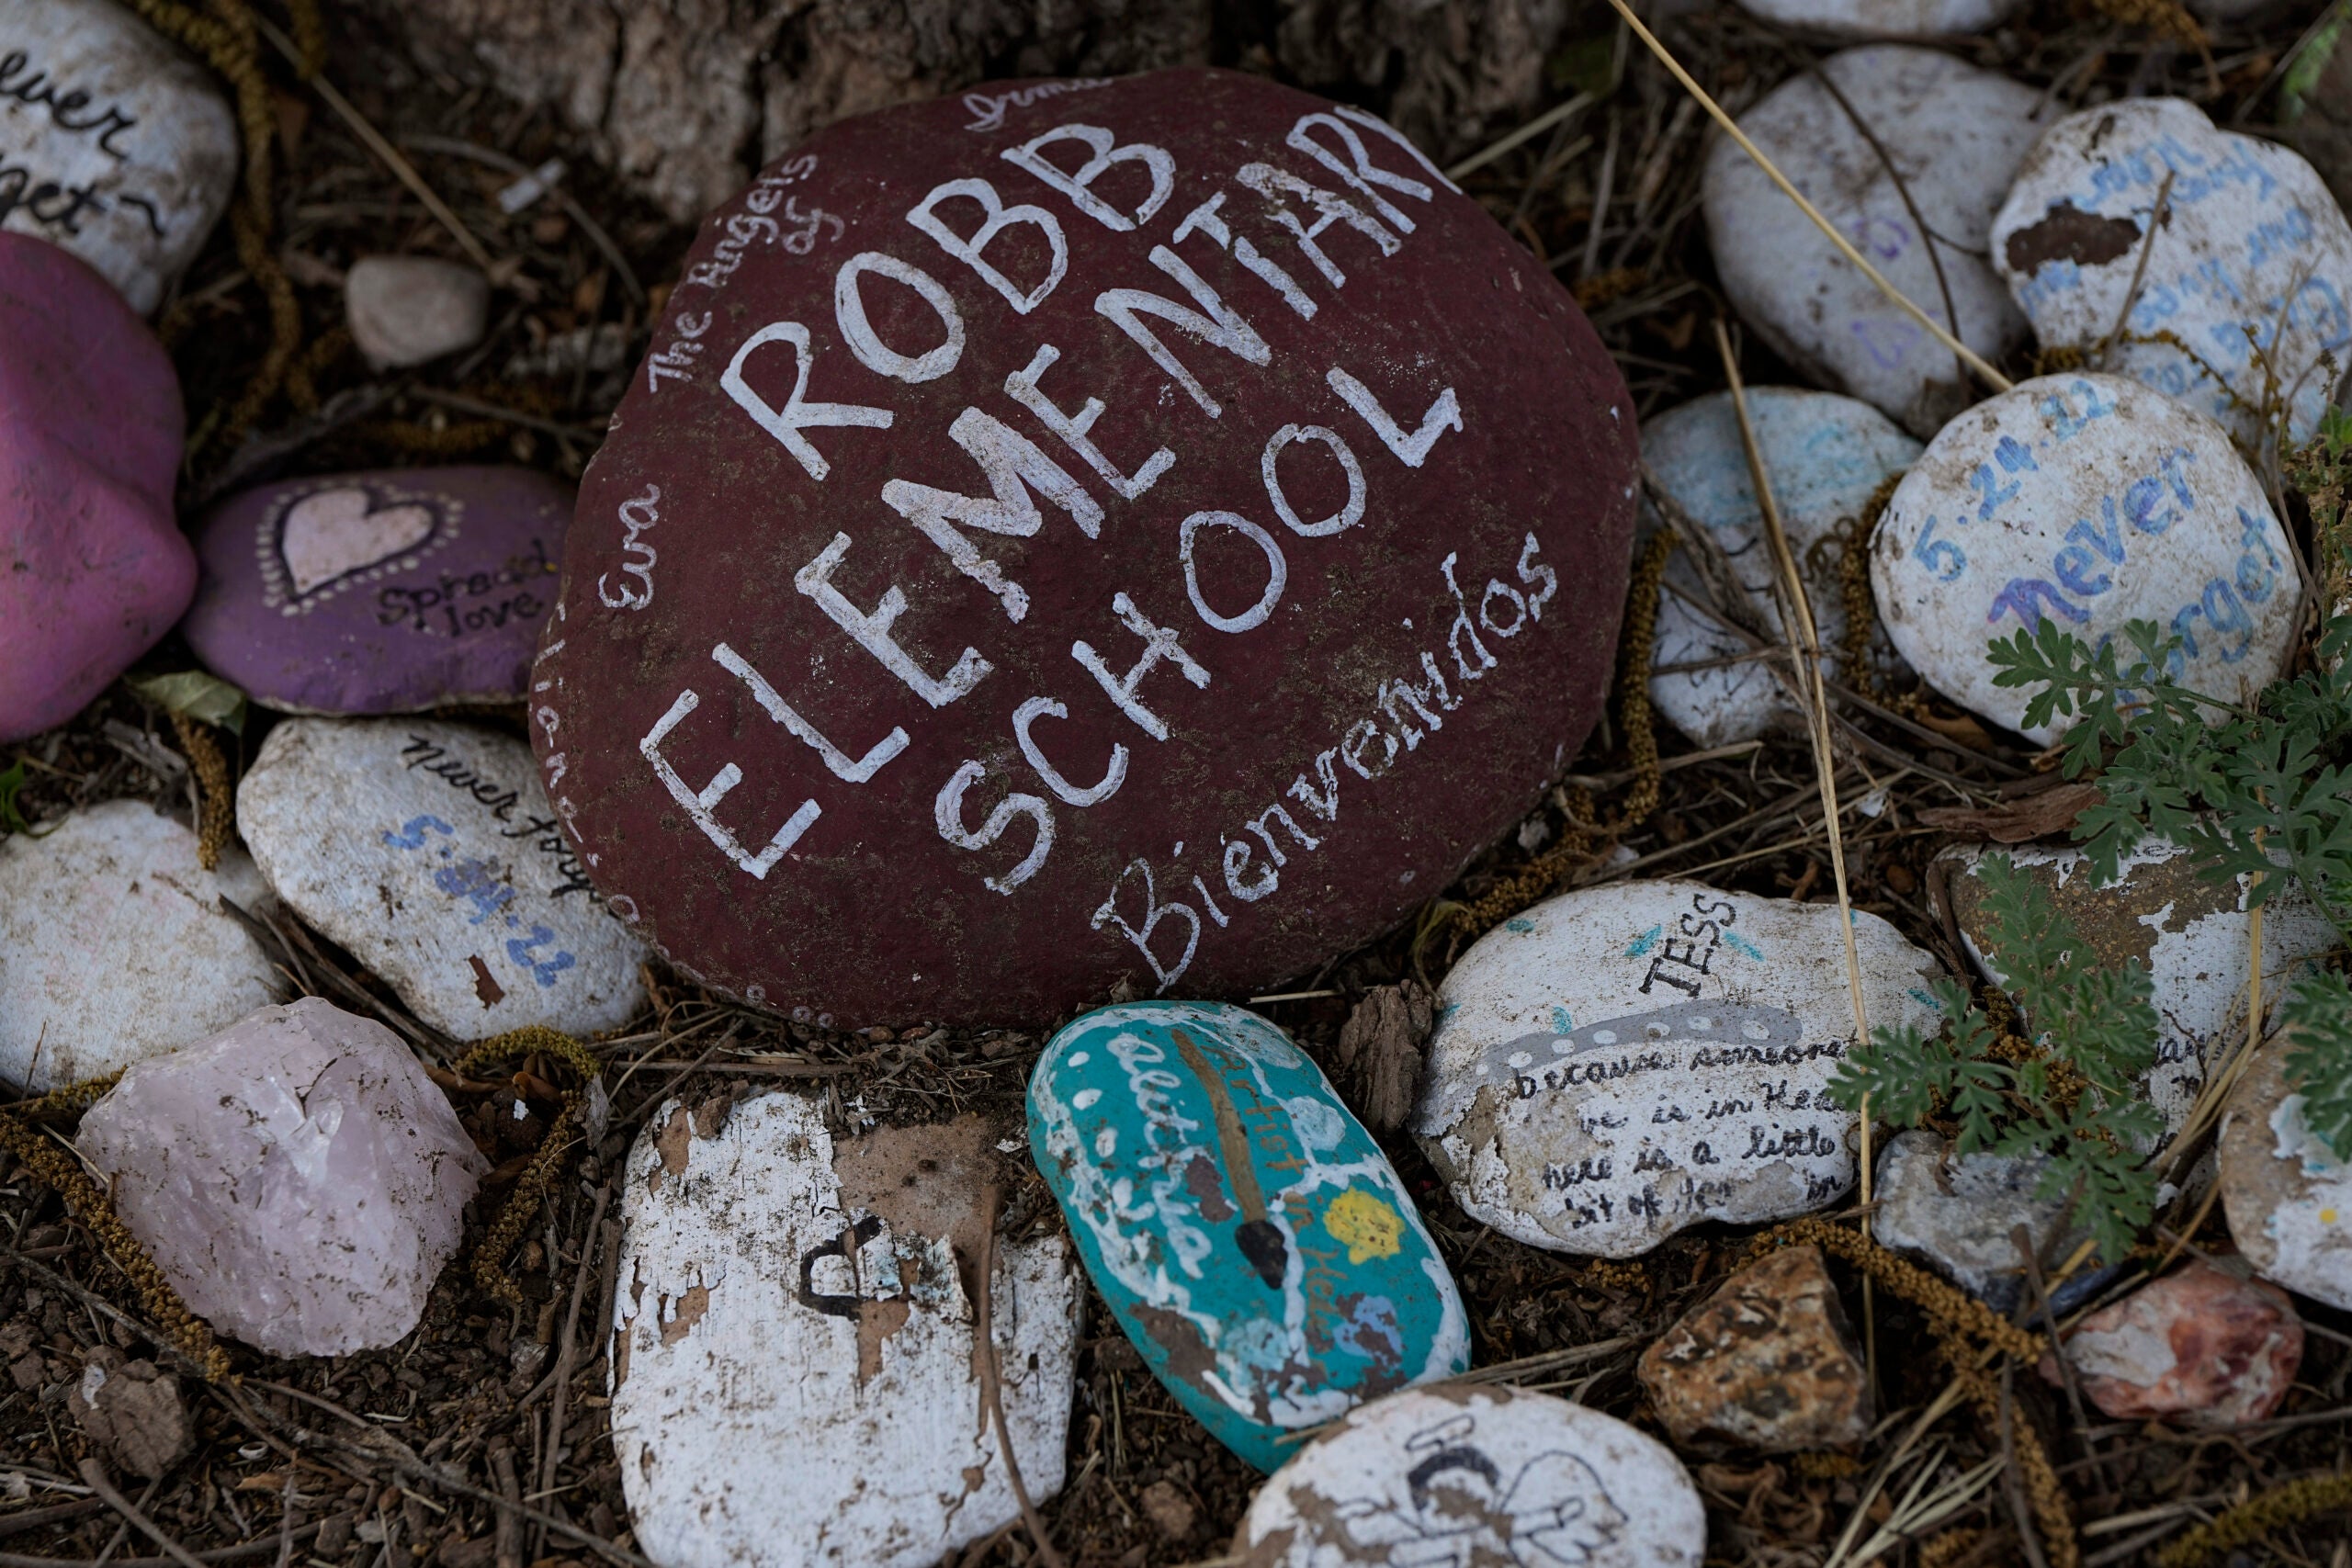 Decorated rocks honor the victims of the shooting at Robb Elementary School in Uvalde, Texas.